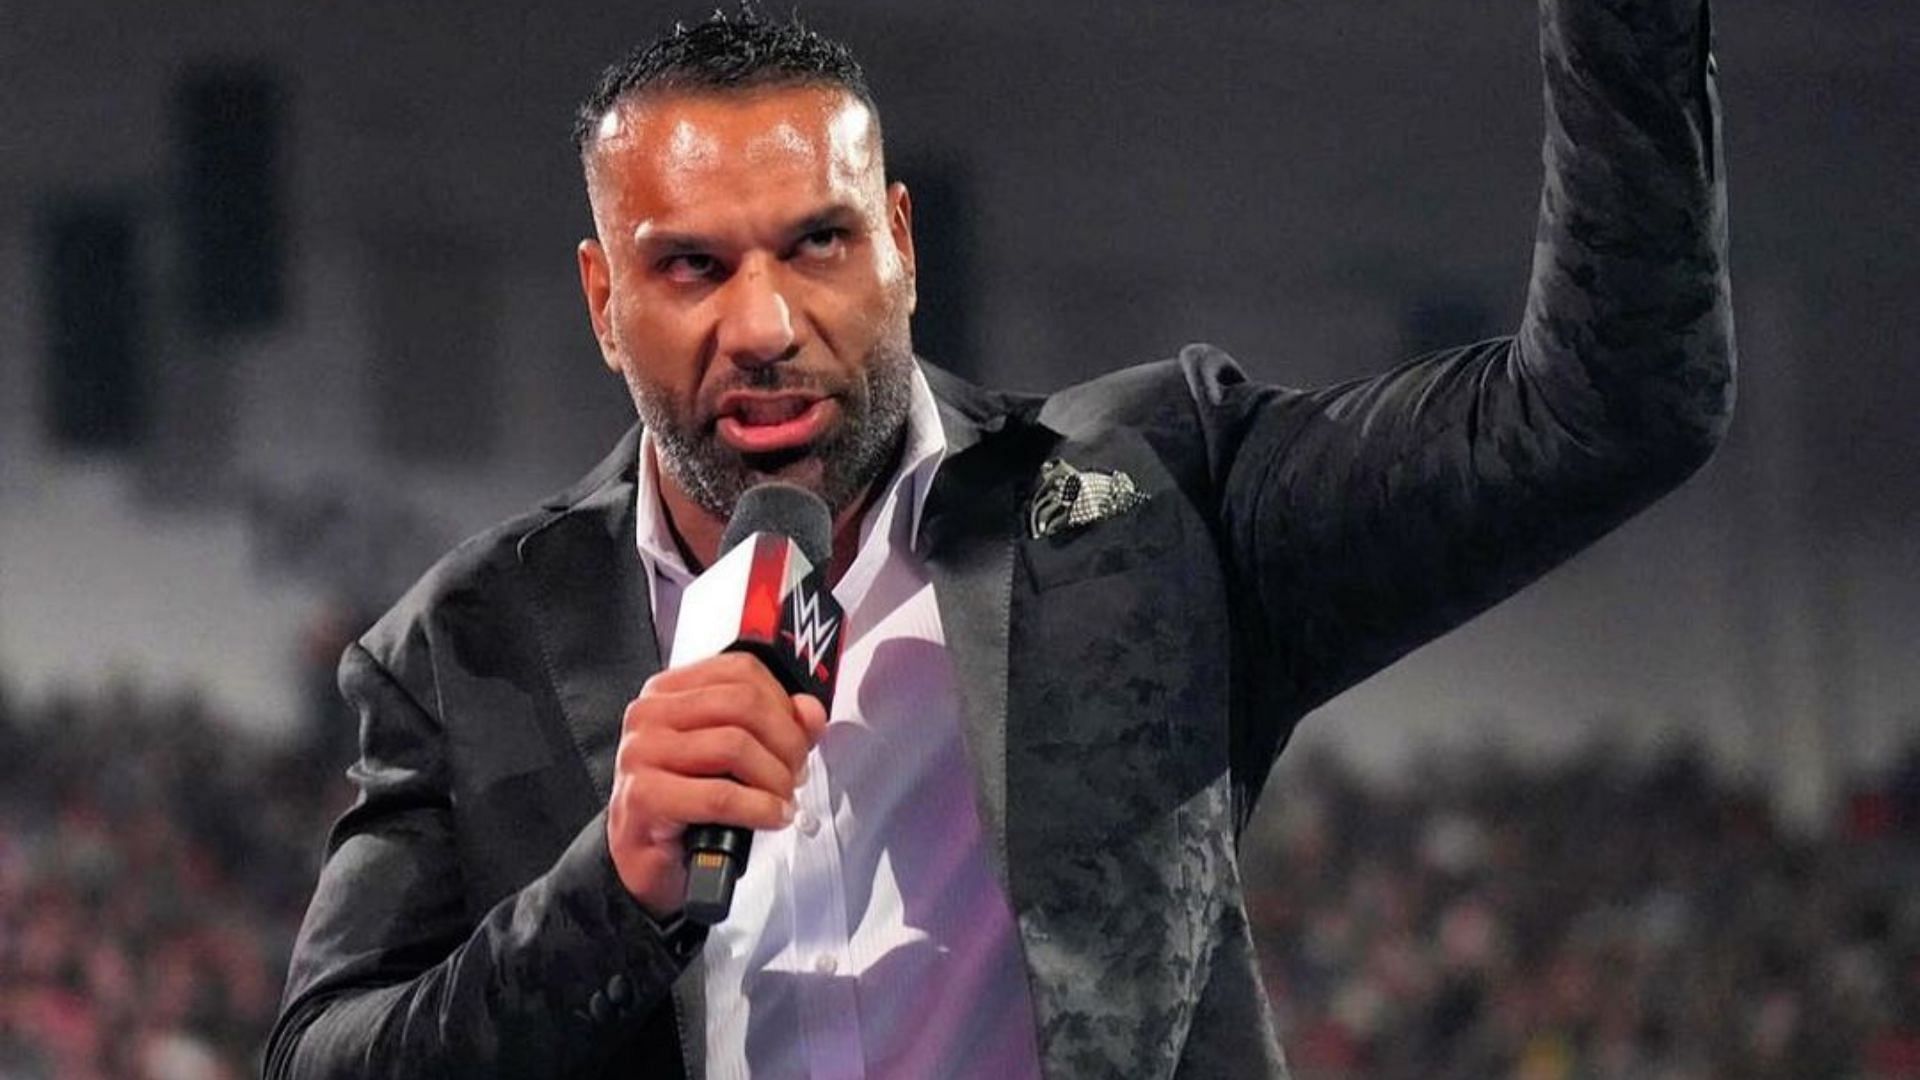 Jinder Mahal will face Seth Rollins for the title on RAW